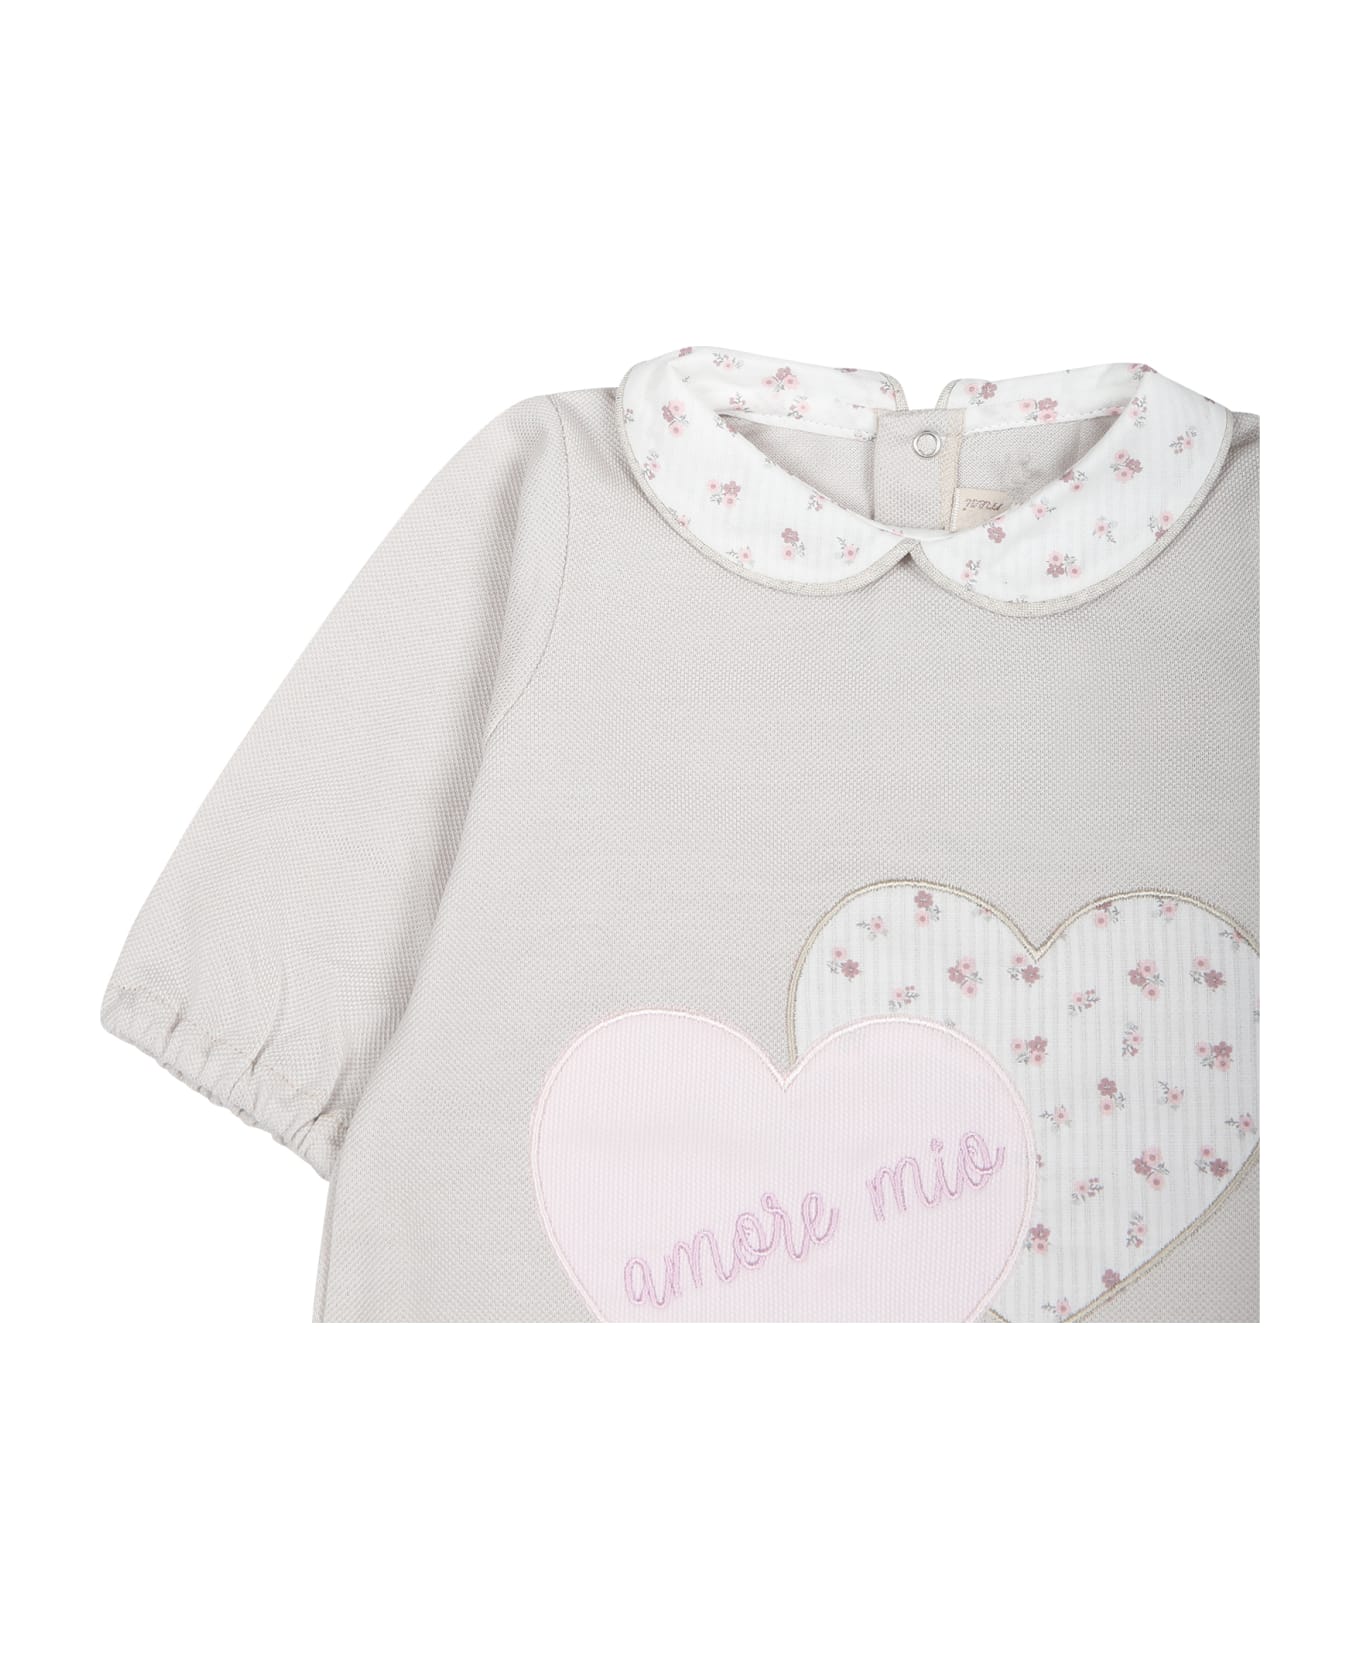 La stupenderia Beige Babygrow For Baby Girl With Hearts And Writing - Beige